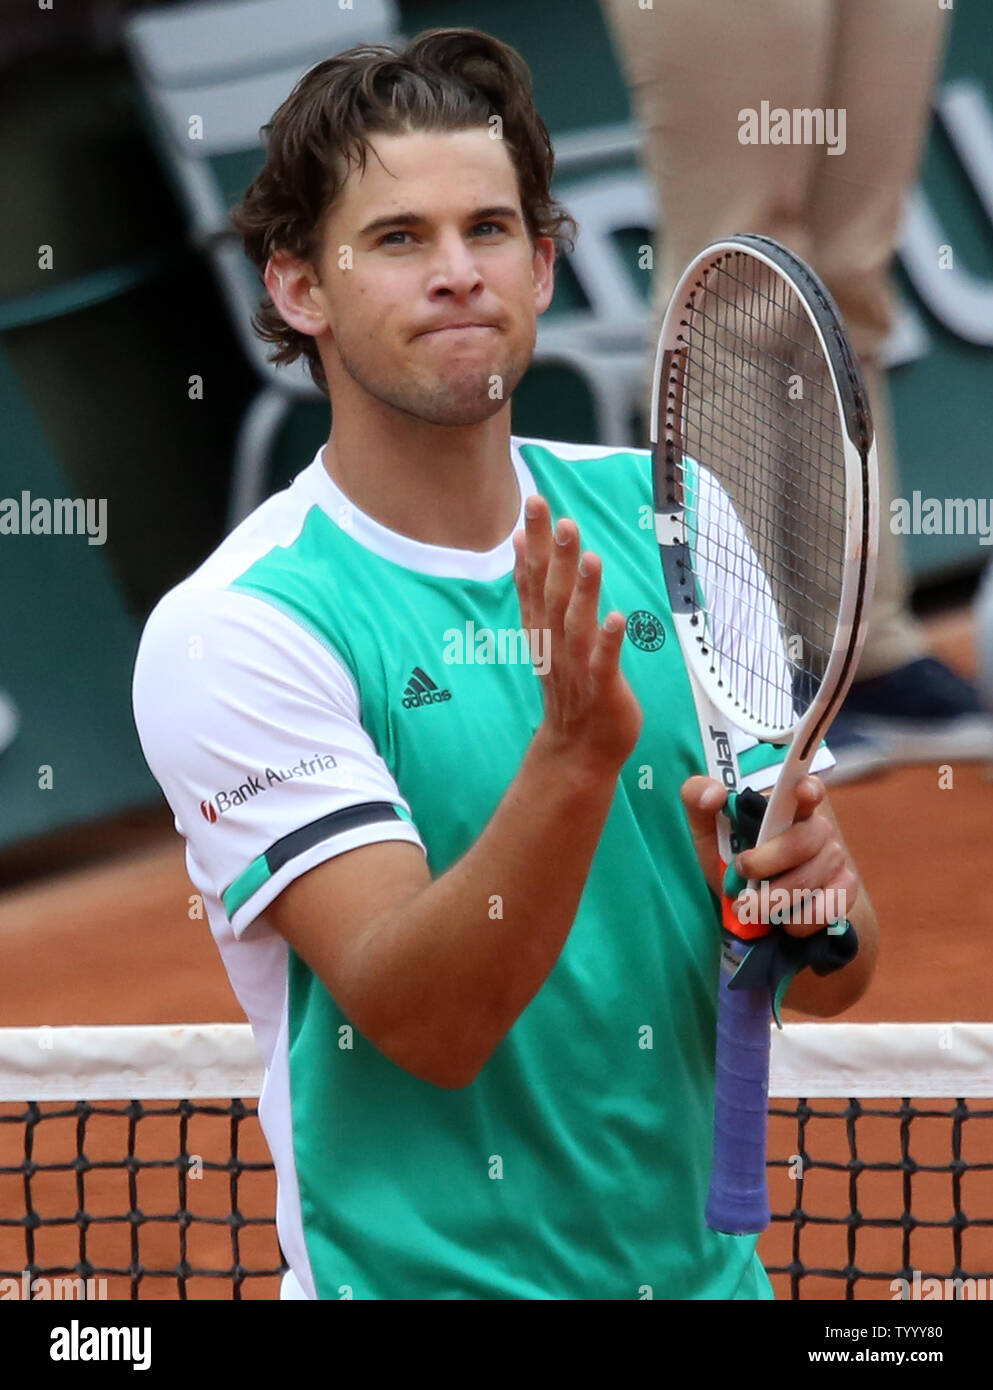 Dominic Thiem of Austria acknowledges the crowd after winning his French  Open men's quarterfinal match against Novak Djokovic of Serbia at Roland  Garros in Paris on June 7, 2017. Thiem defeated Djokovic